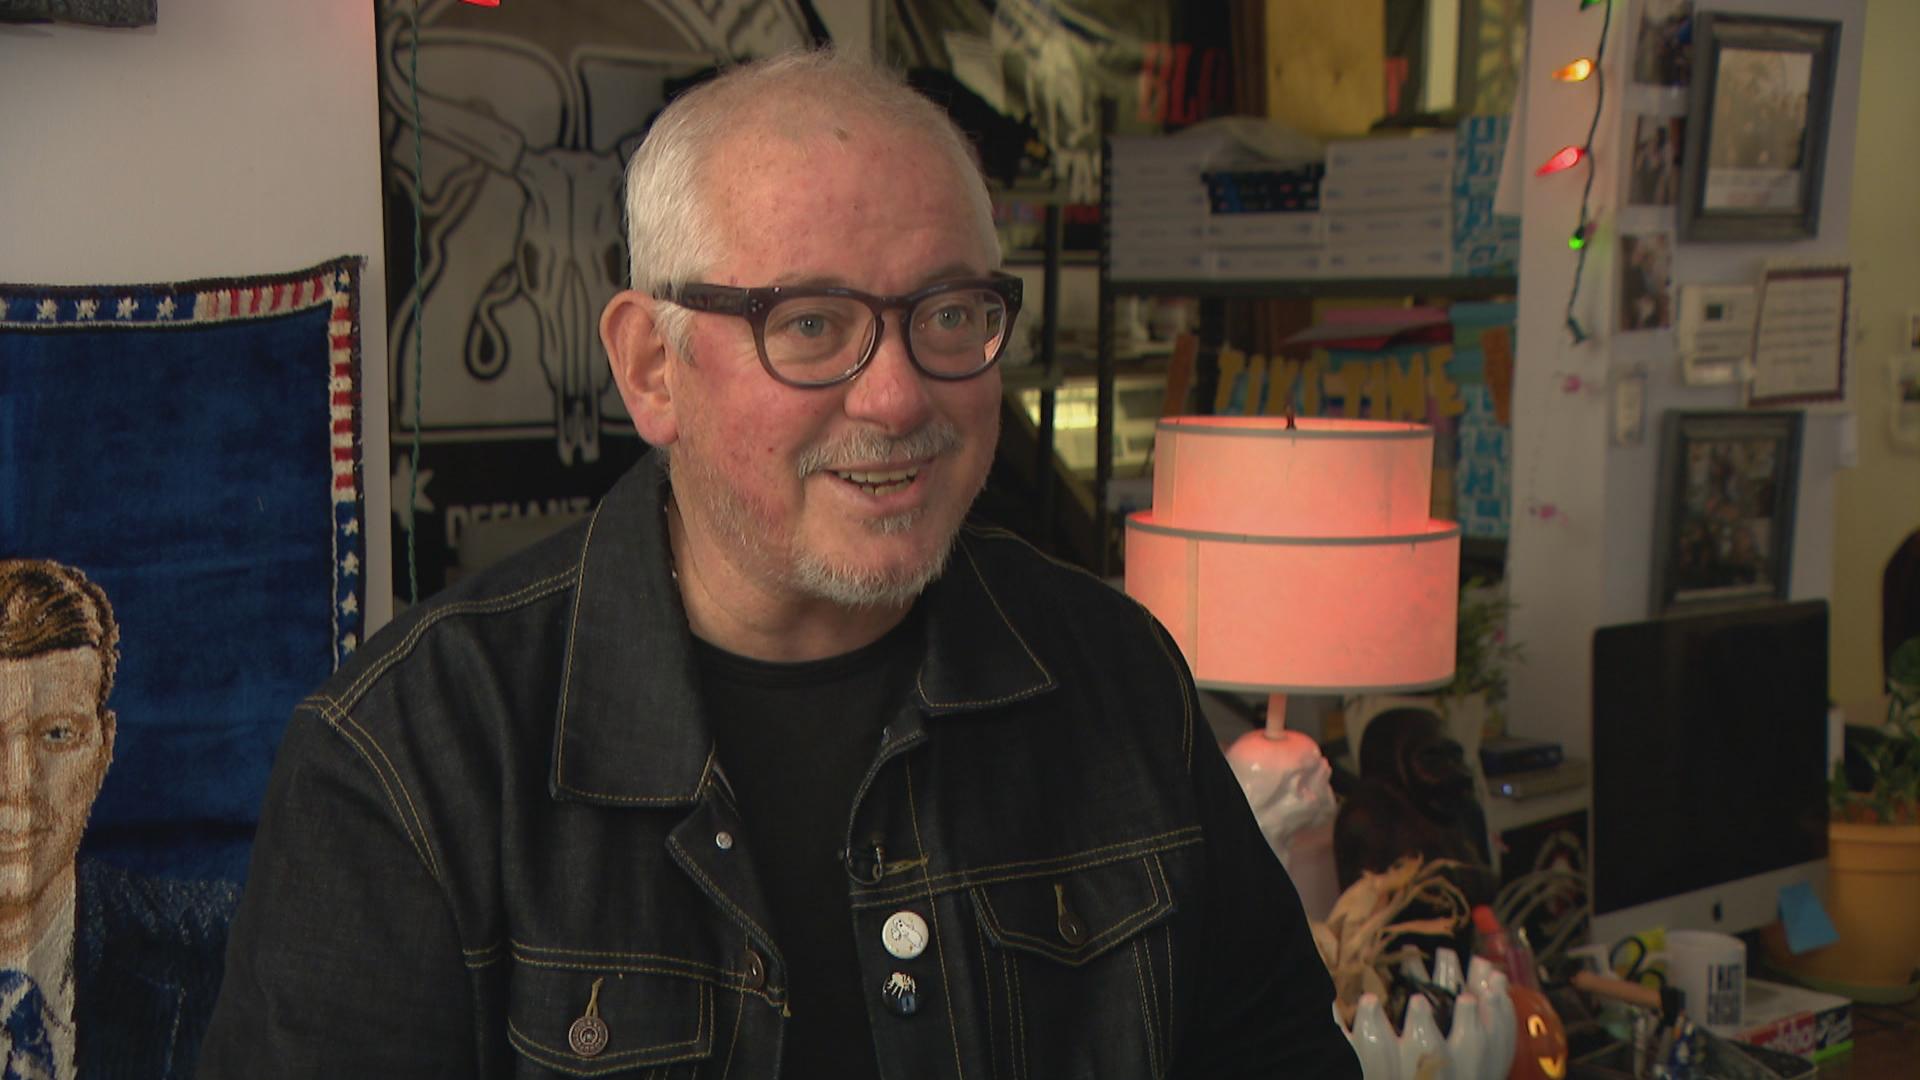 Chicago-based musician Jon Langford speaks with WTTW News about long relationship with Bloodshot Records. (WTTW News)